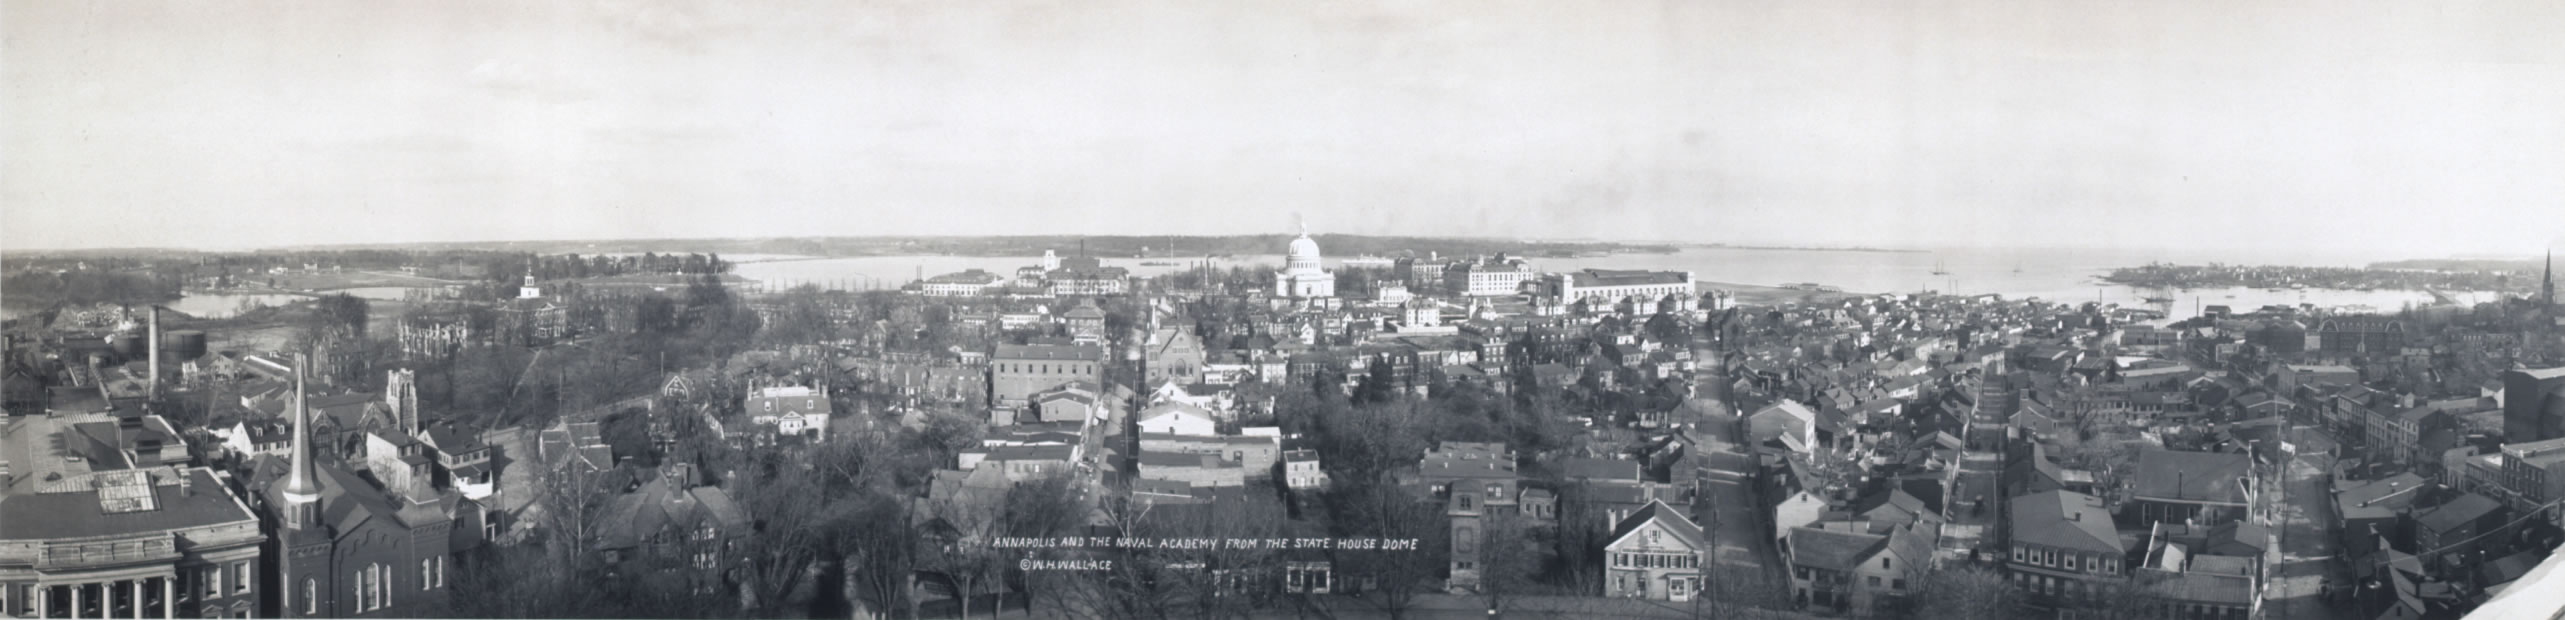 Annapolis panoramic view from State House 1911